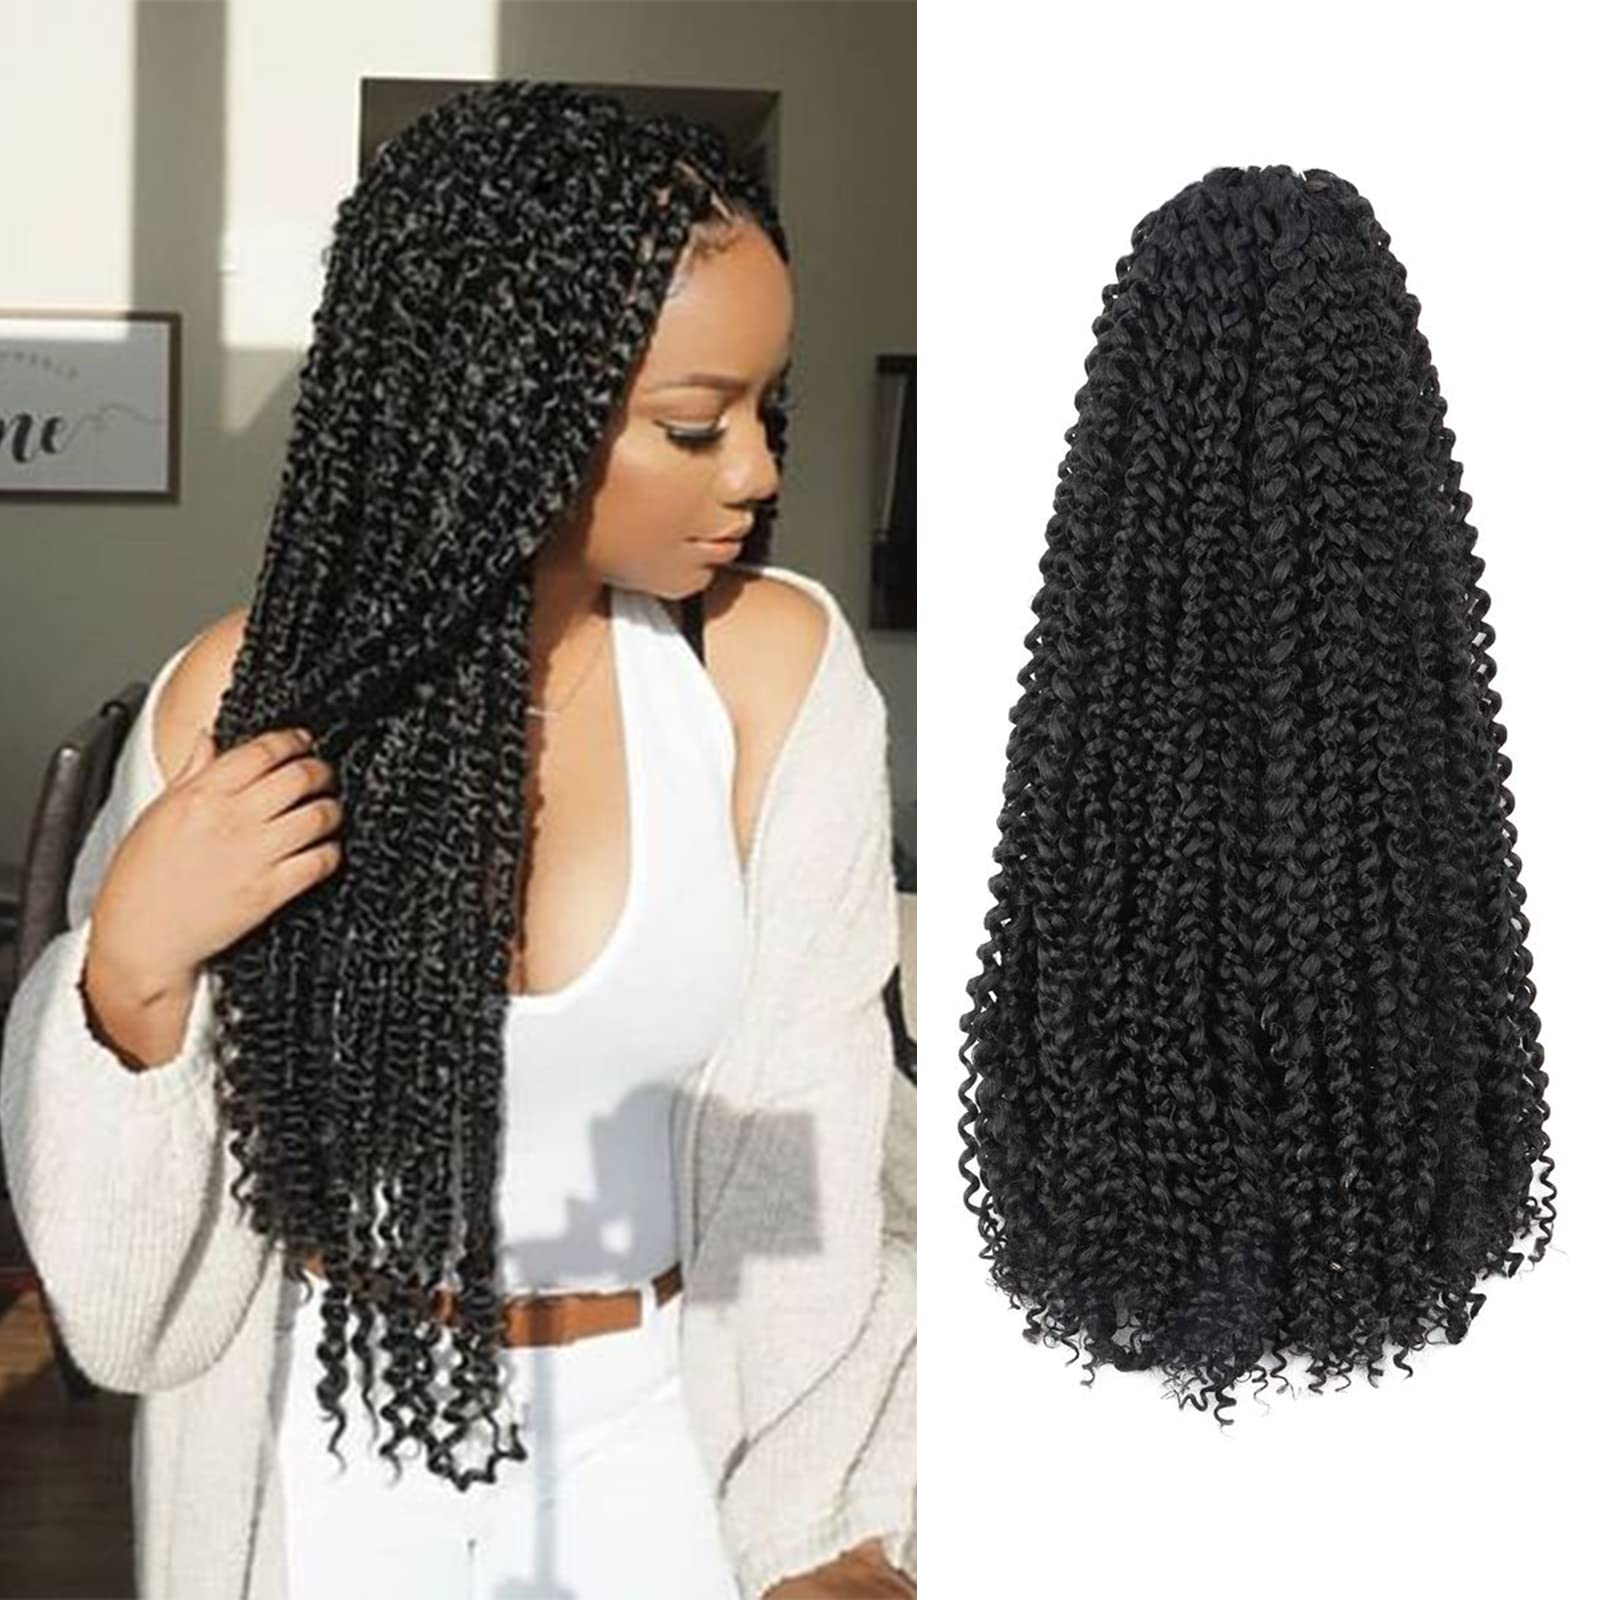 TOYOTRESS Water Wave Passion Twist Hair - Ombre Orange Water Wave Crochet Braids Synthetic Braiding Hair Extensions